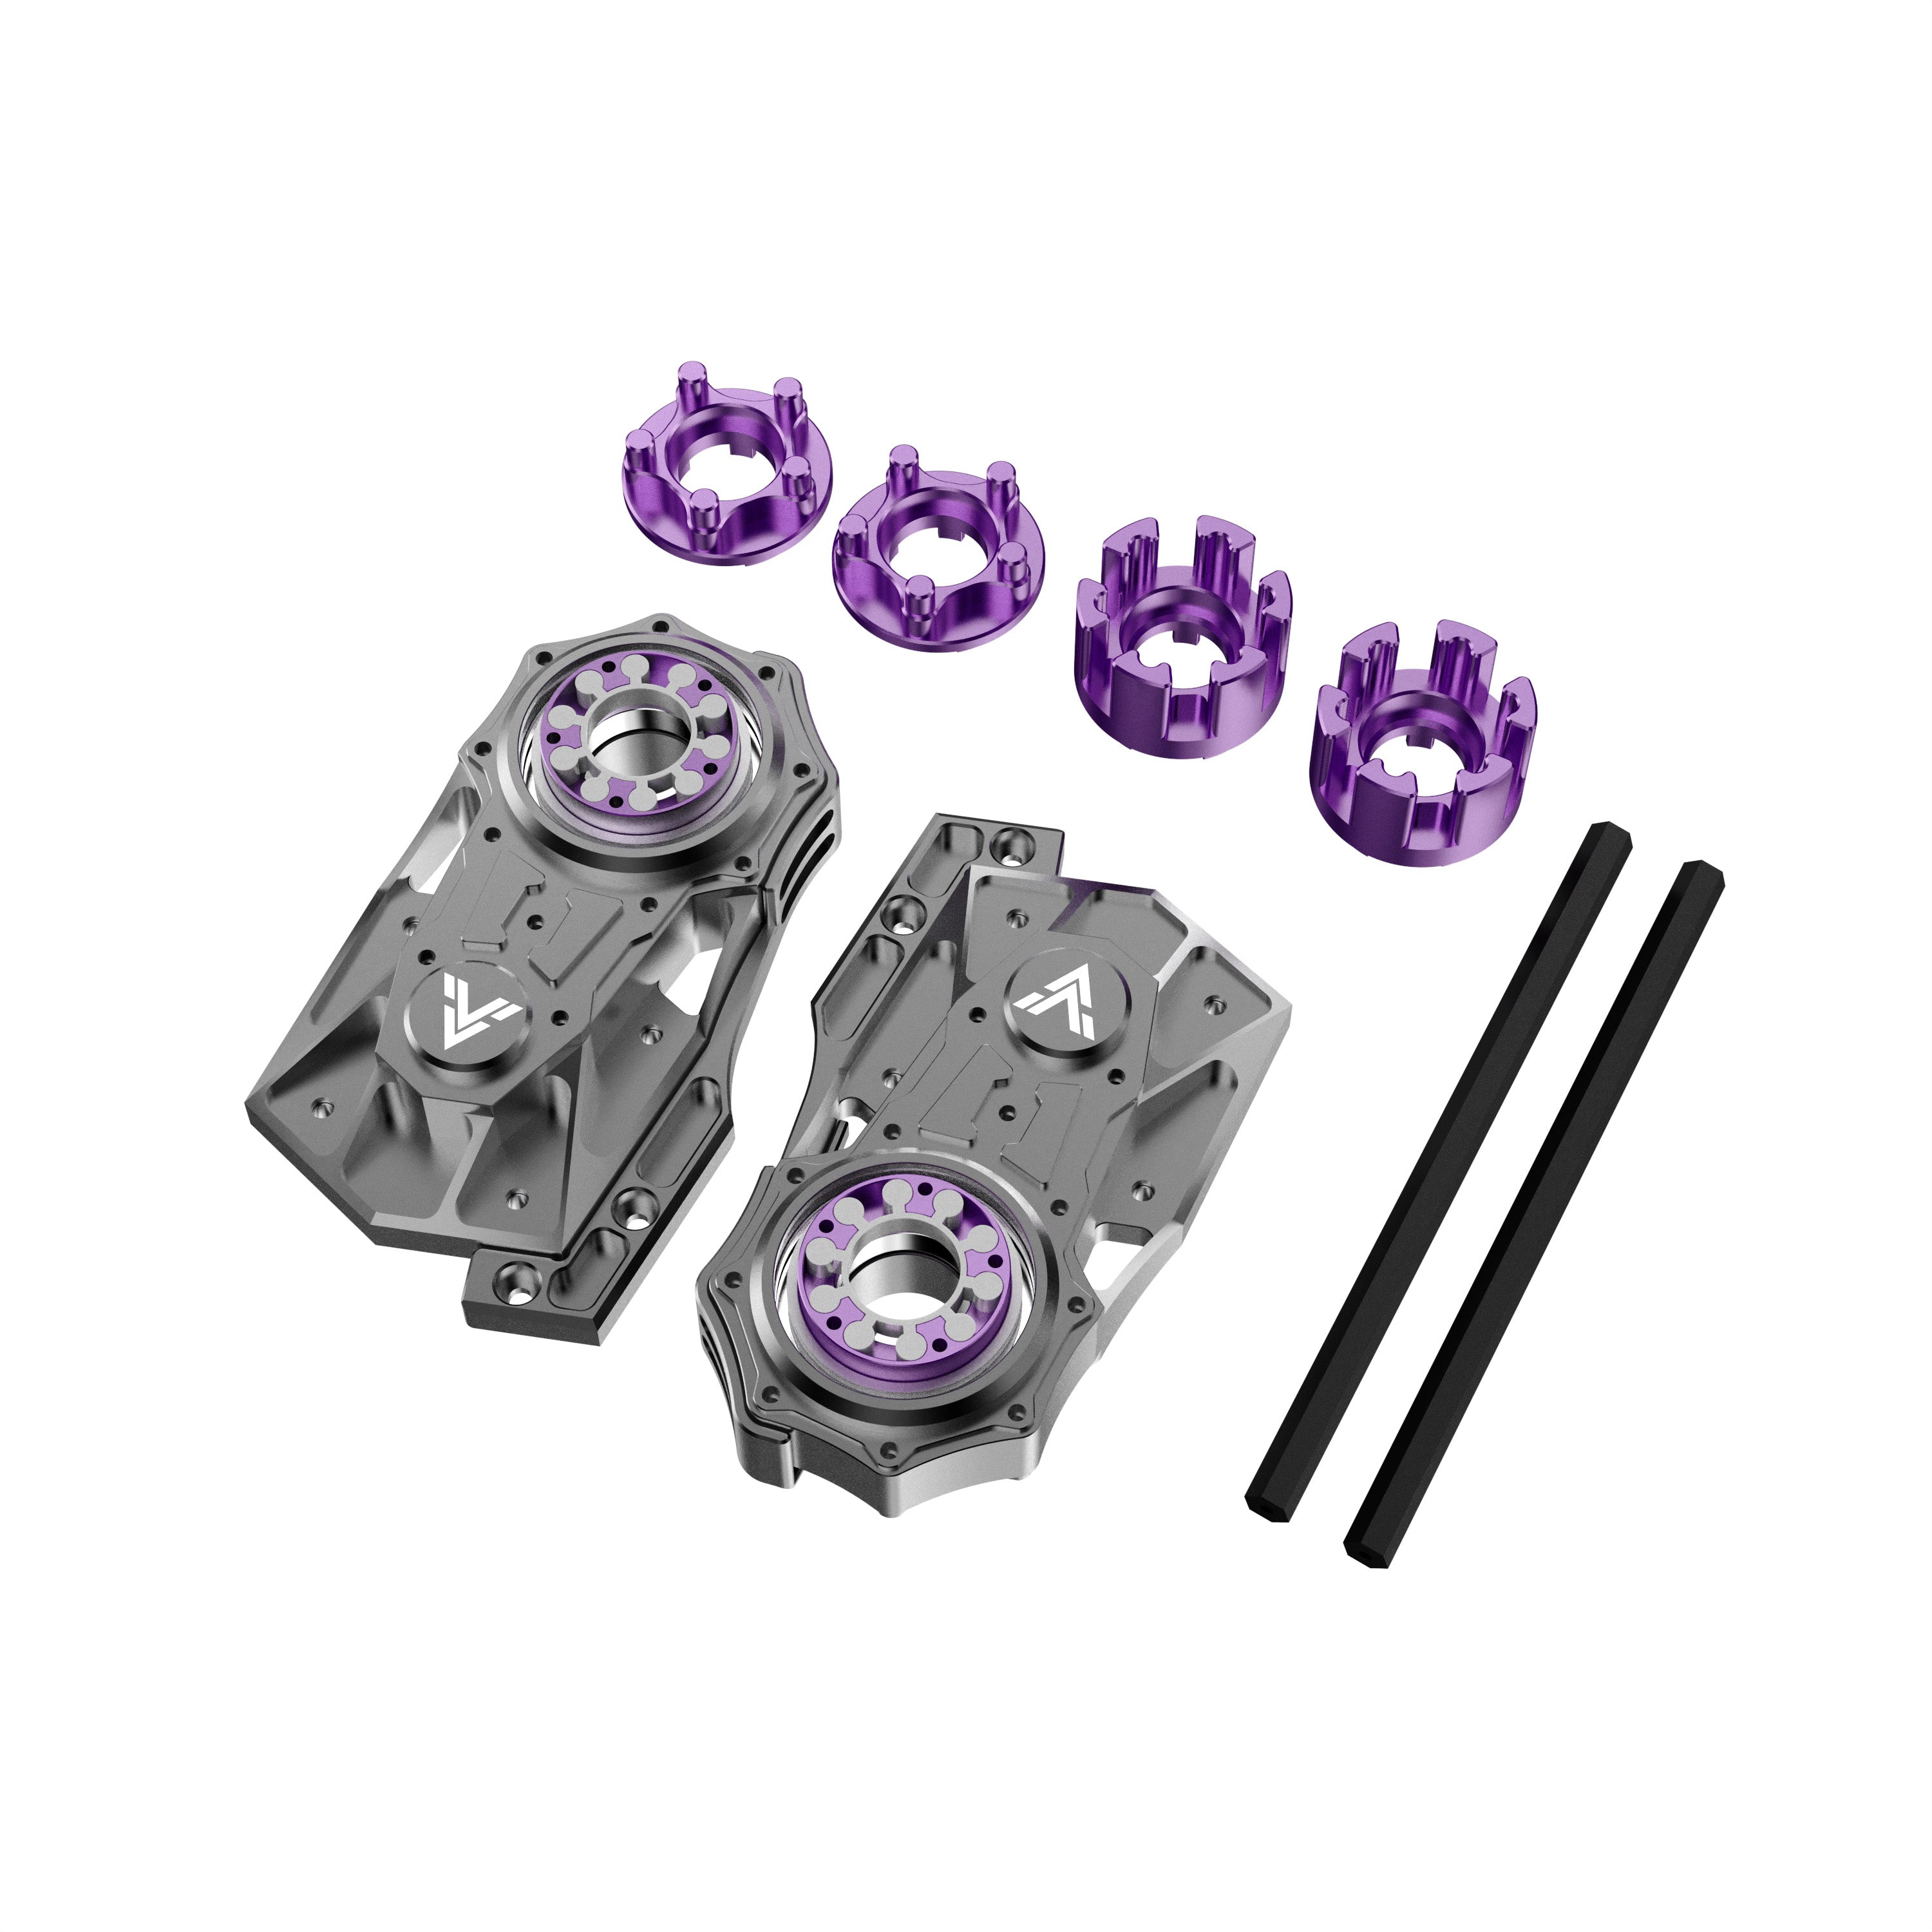 Acedeck® ELEMENT CNC 2-in-1 Gear Drive Kit